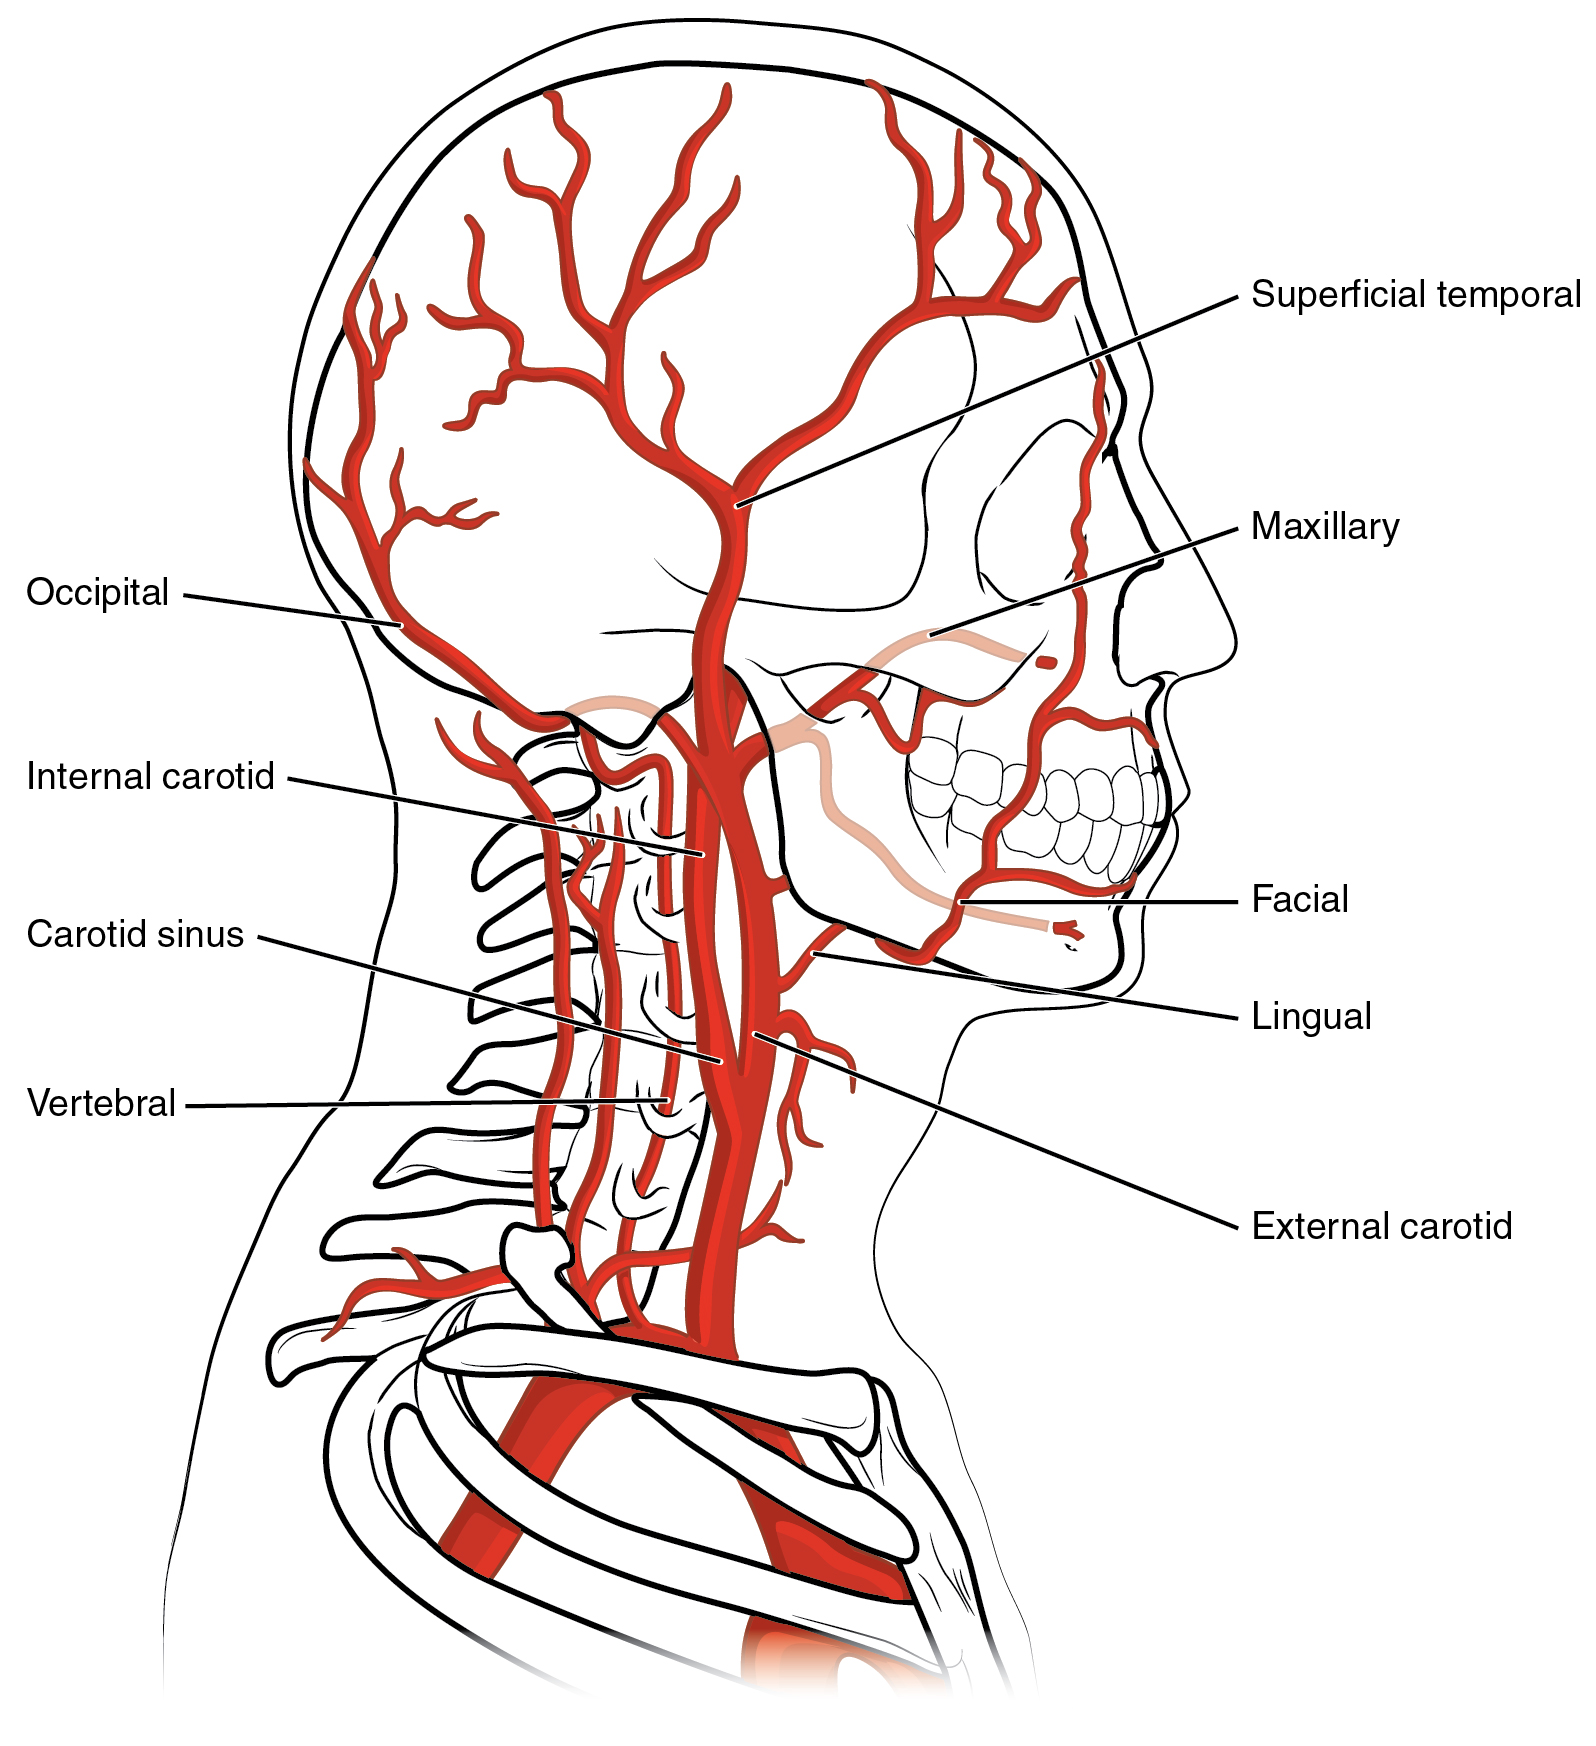 This diagram shows the blood vessels in the head and brain.